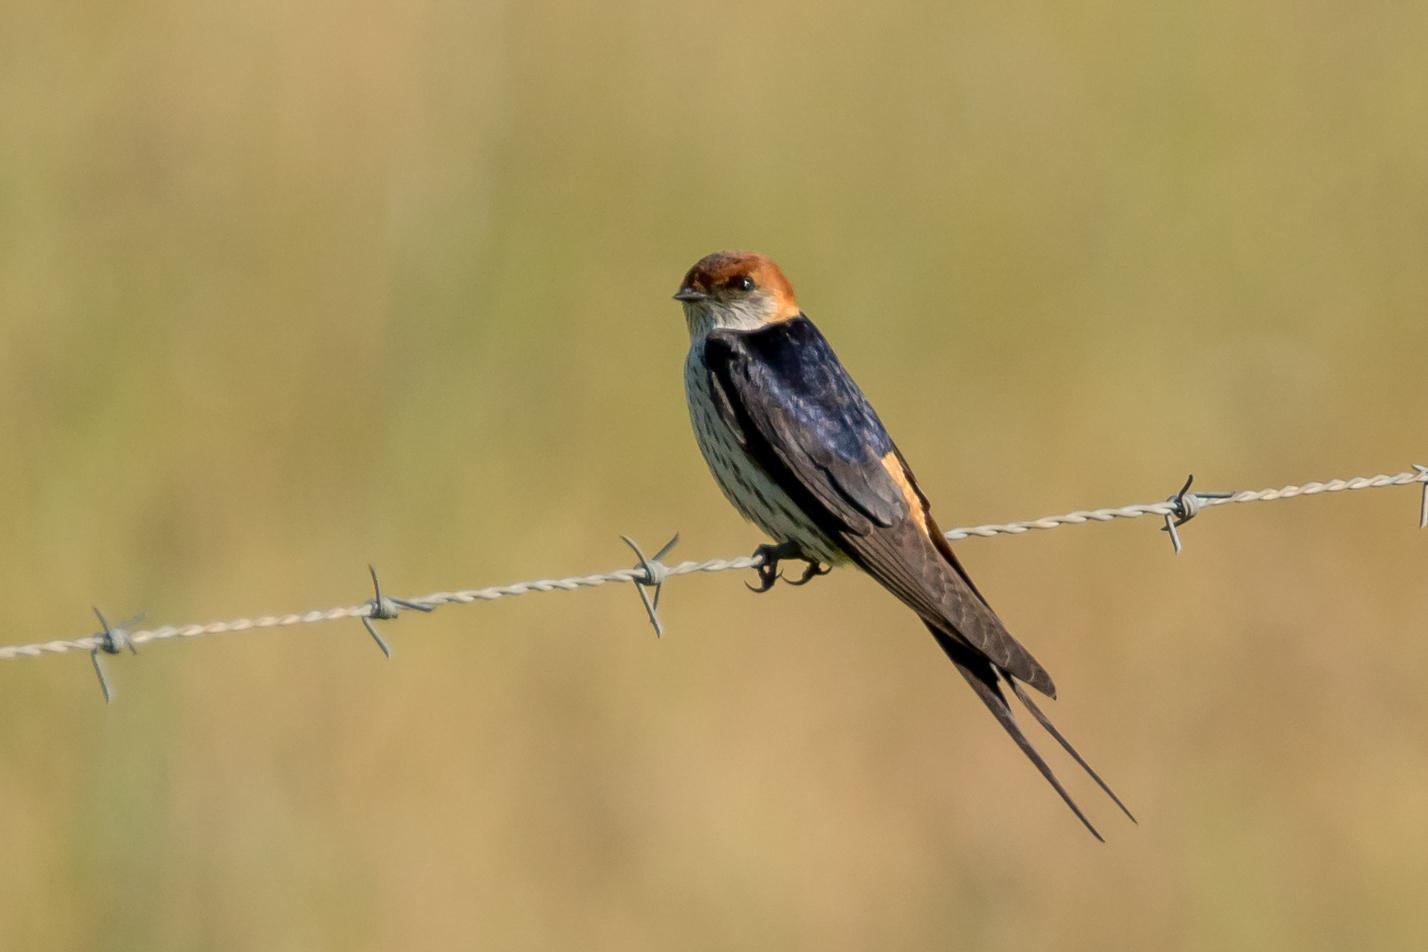 Greater Striped Swallow Photo by Gerald Hoekstra